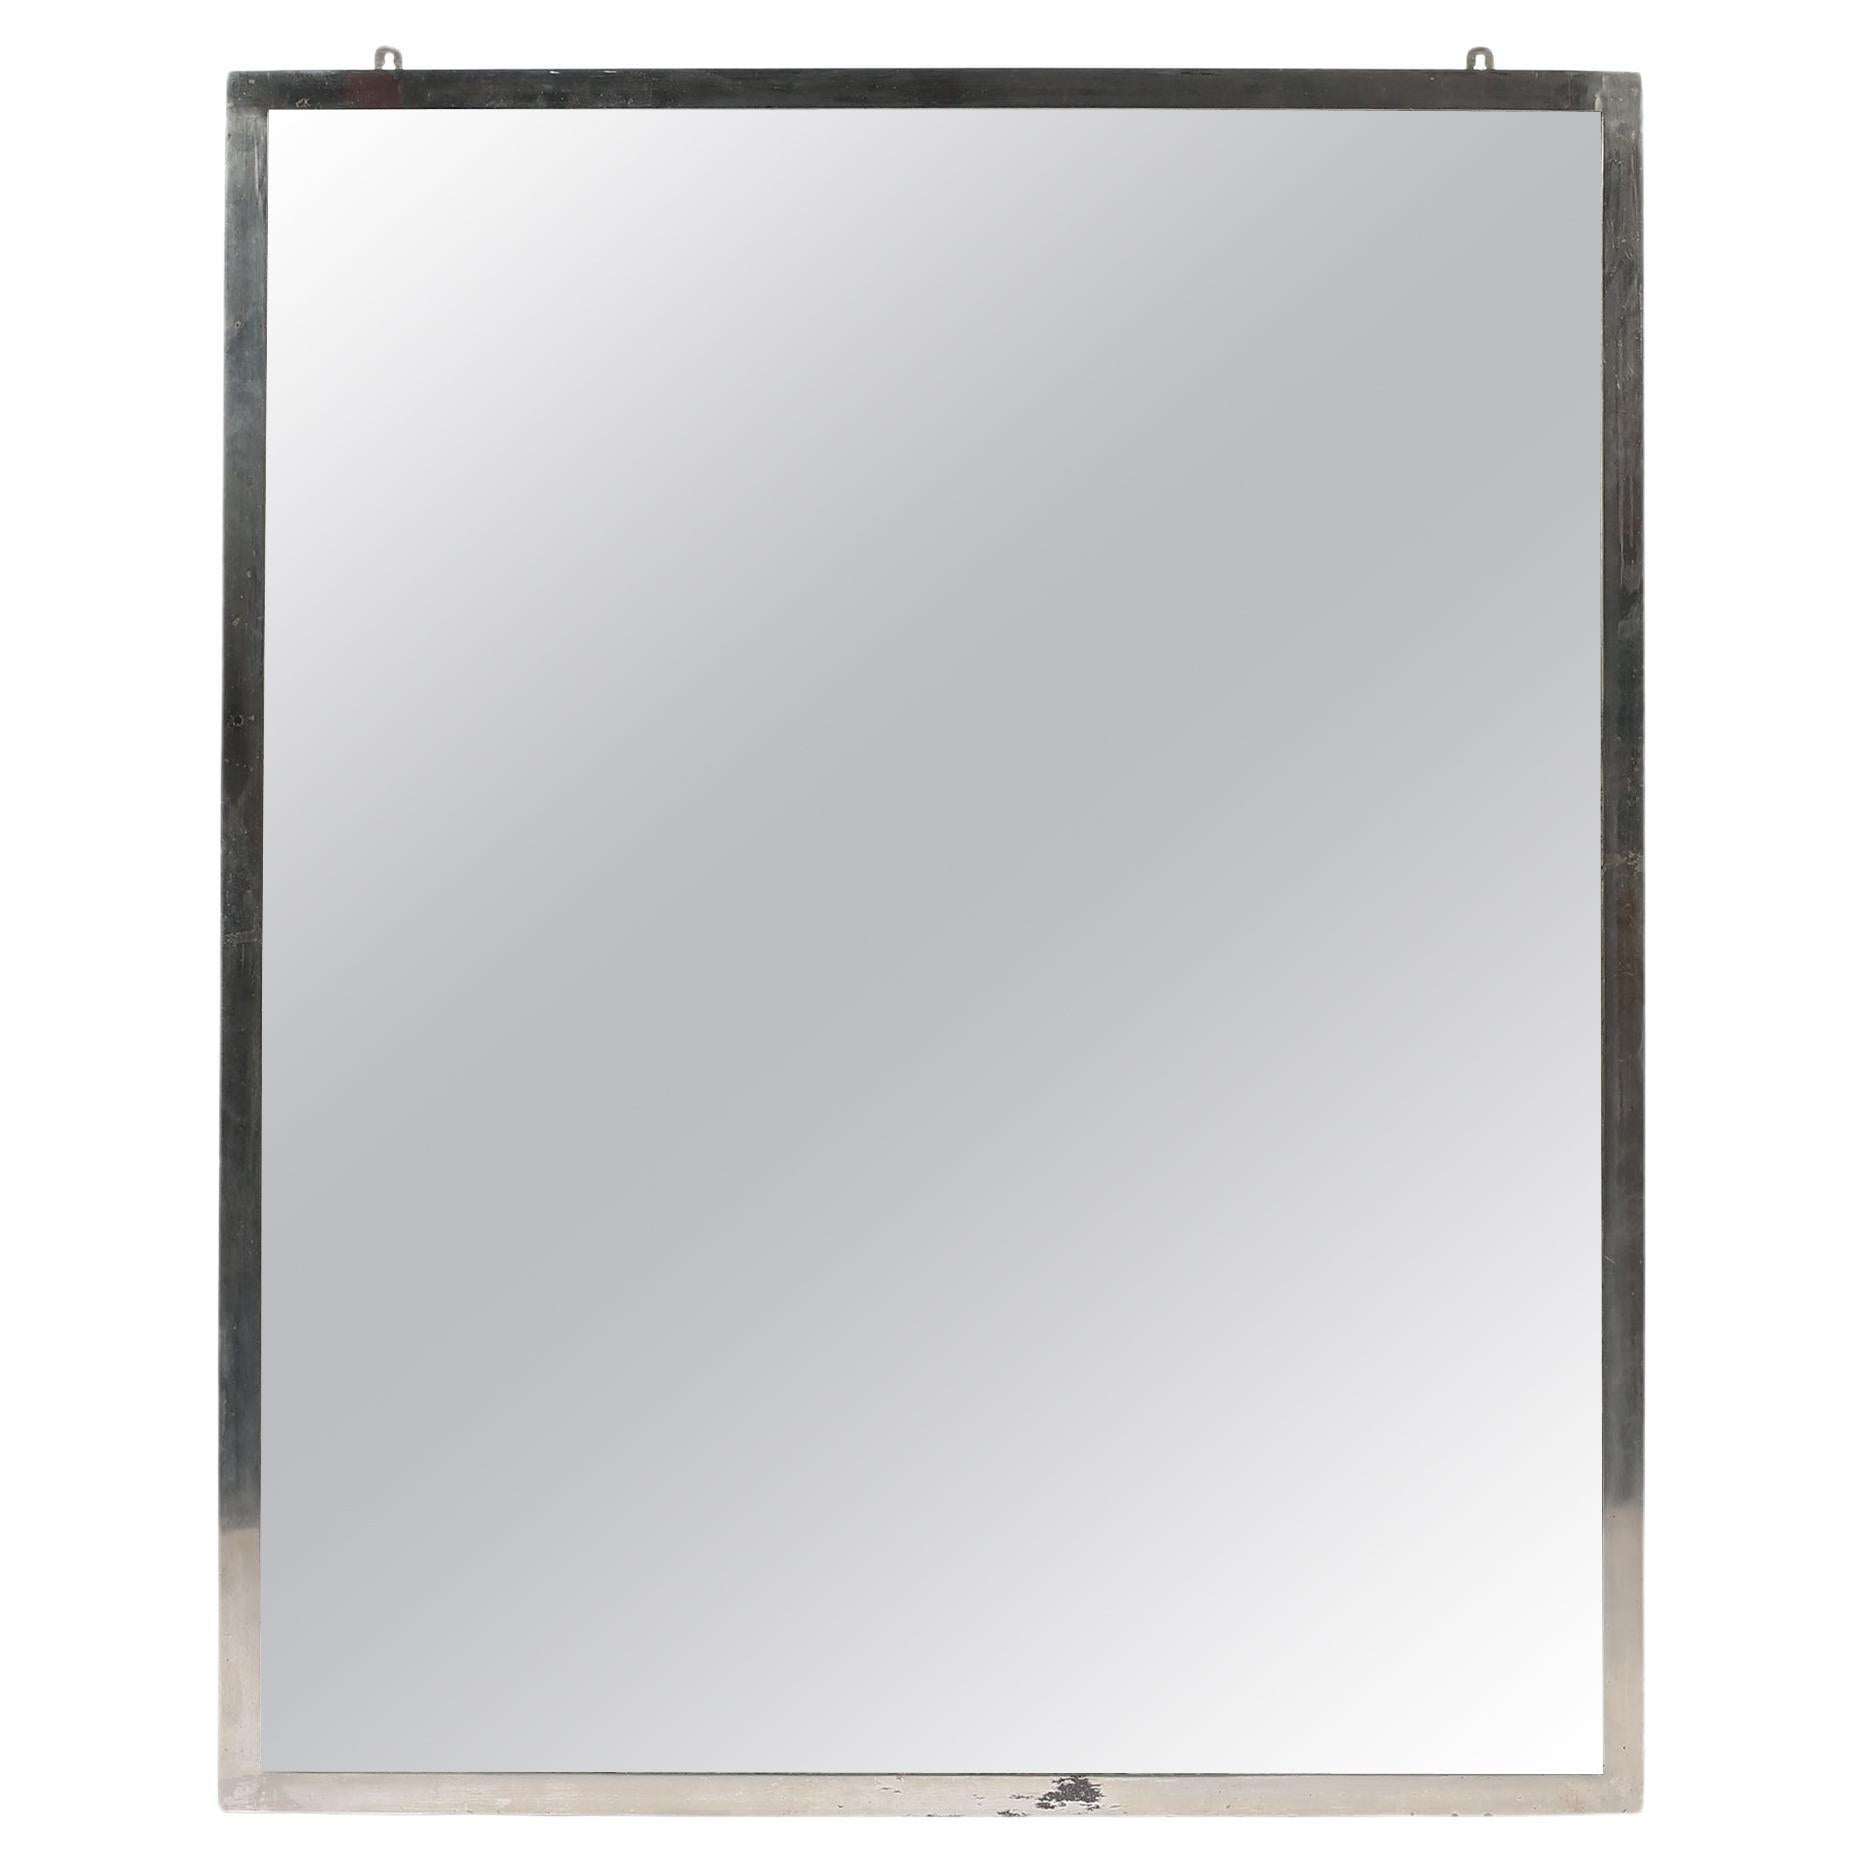 French 1930s Modernist Nickel-Plated Maison Desny Mirror For Sale